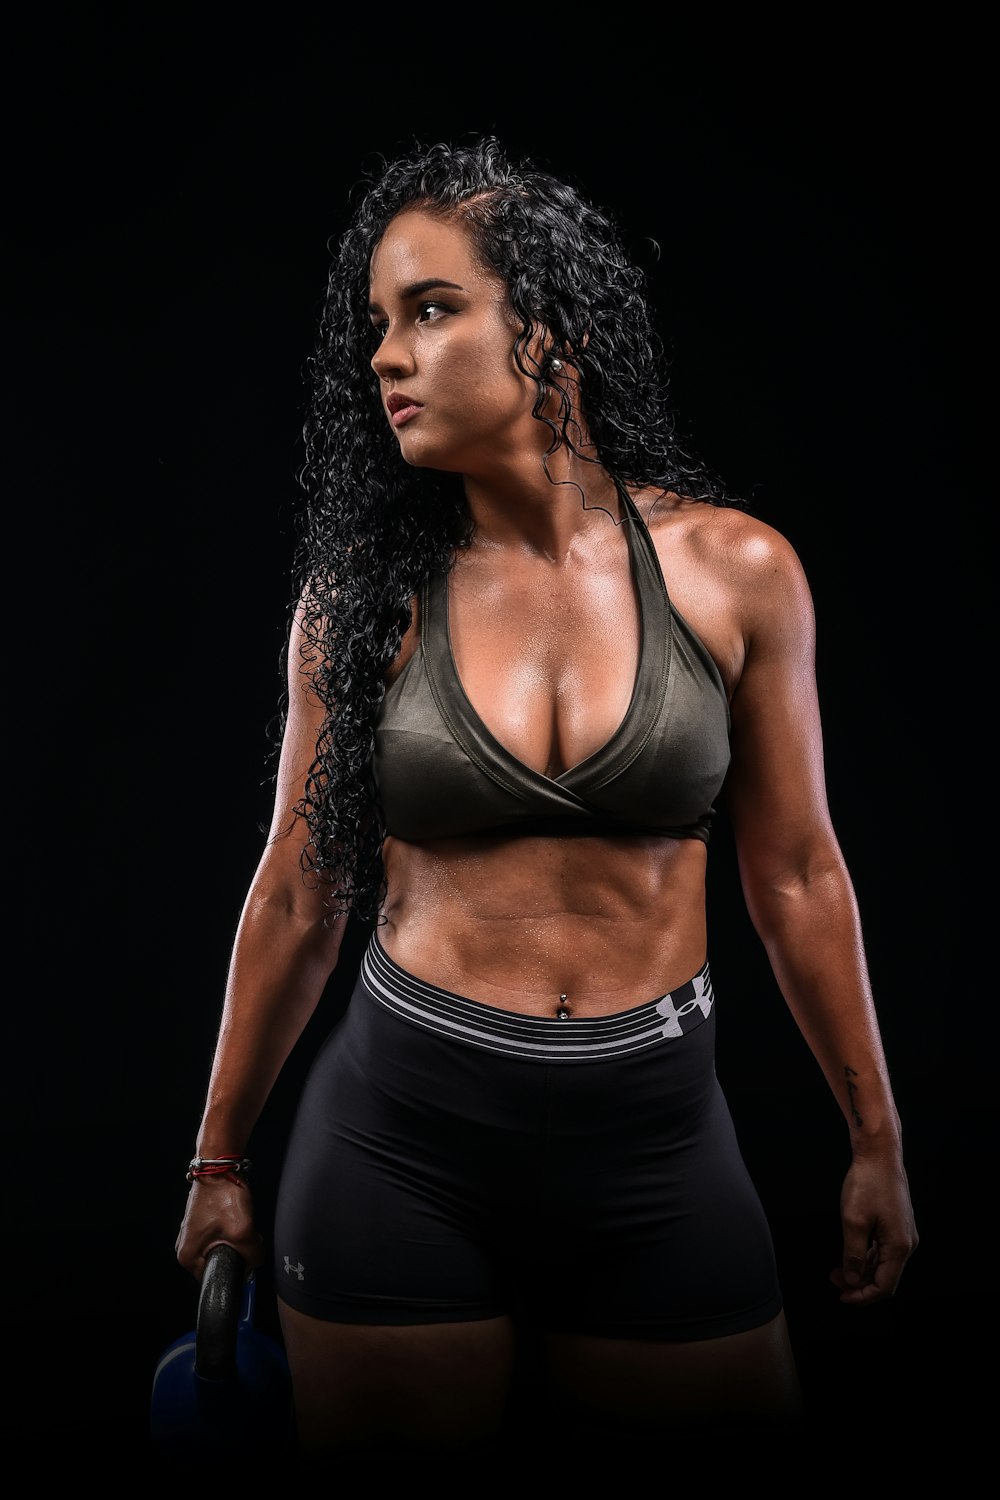 A woman in a sports bra top is using a stationary exercise machine photo –  Working out Image on Unsplash